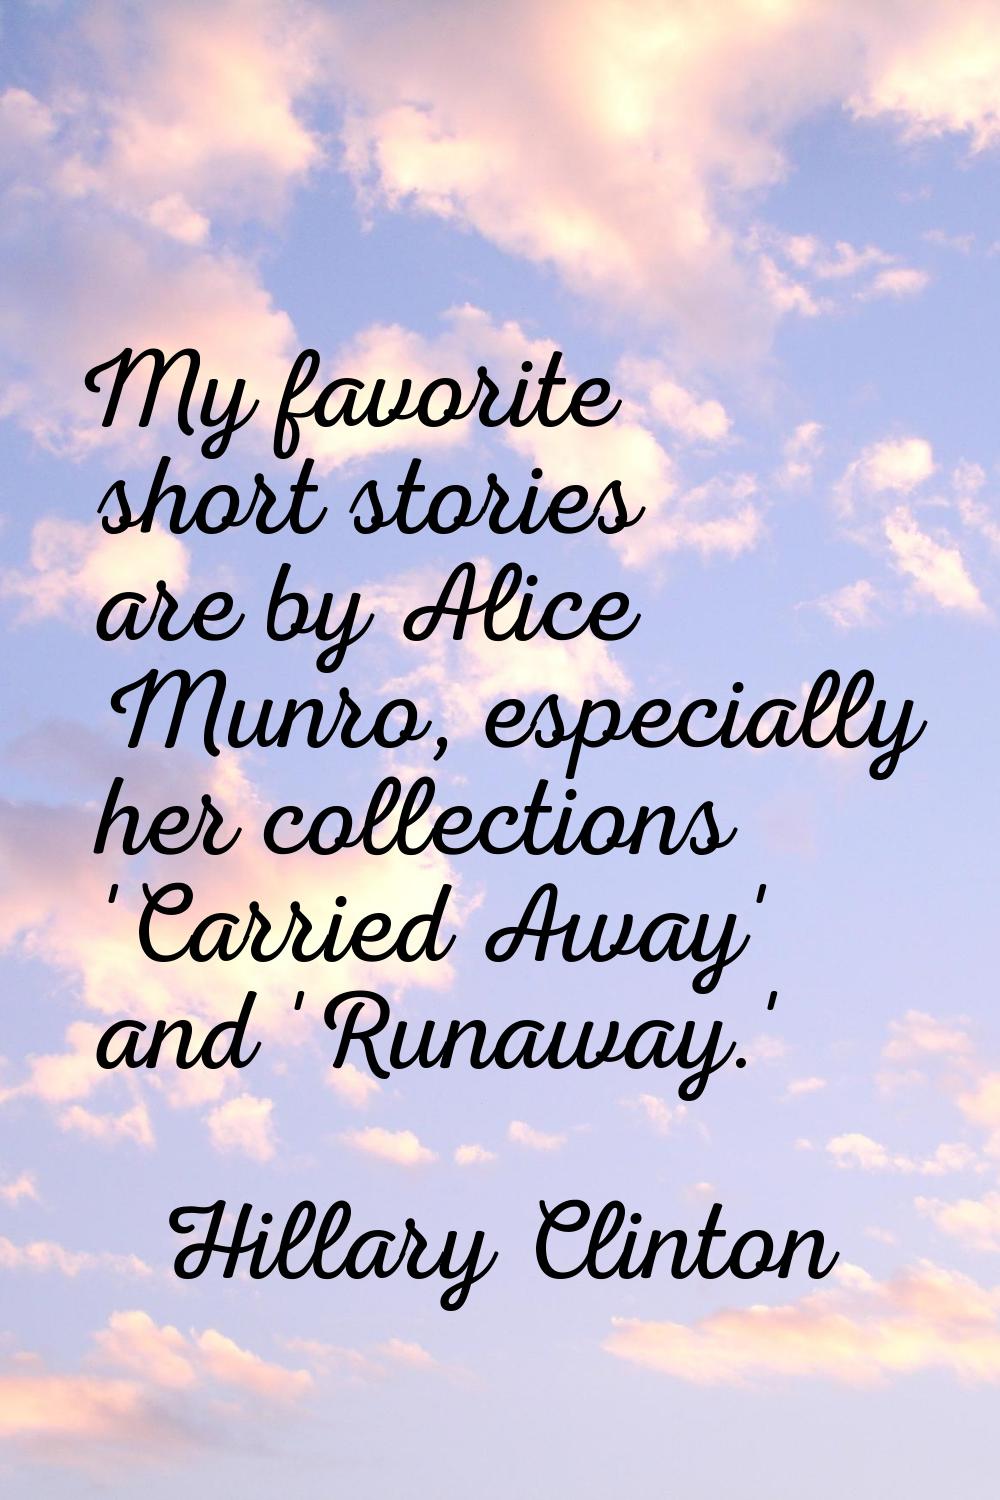 My favorite short stories are by Alice Munro, especially her collections 'Carried Away' and 'Runawa